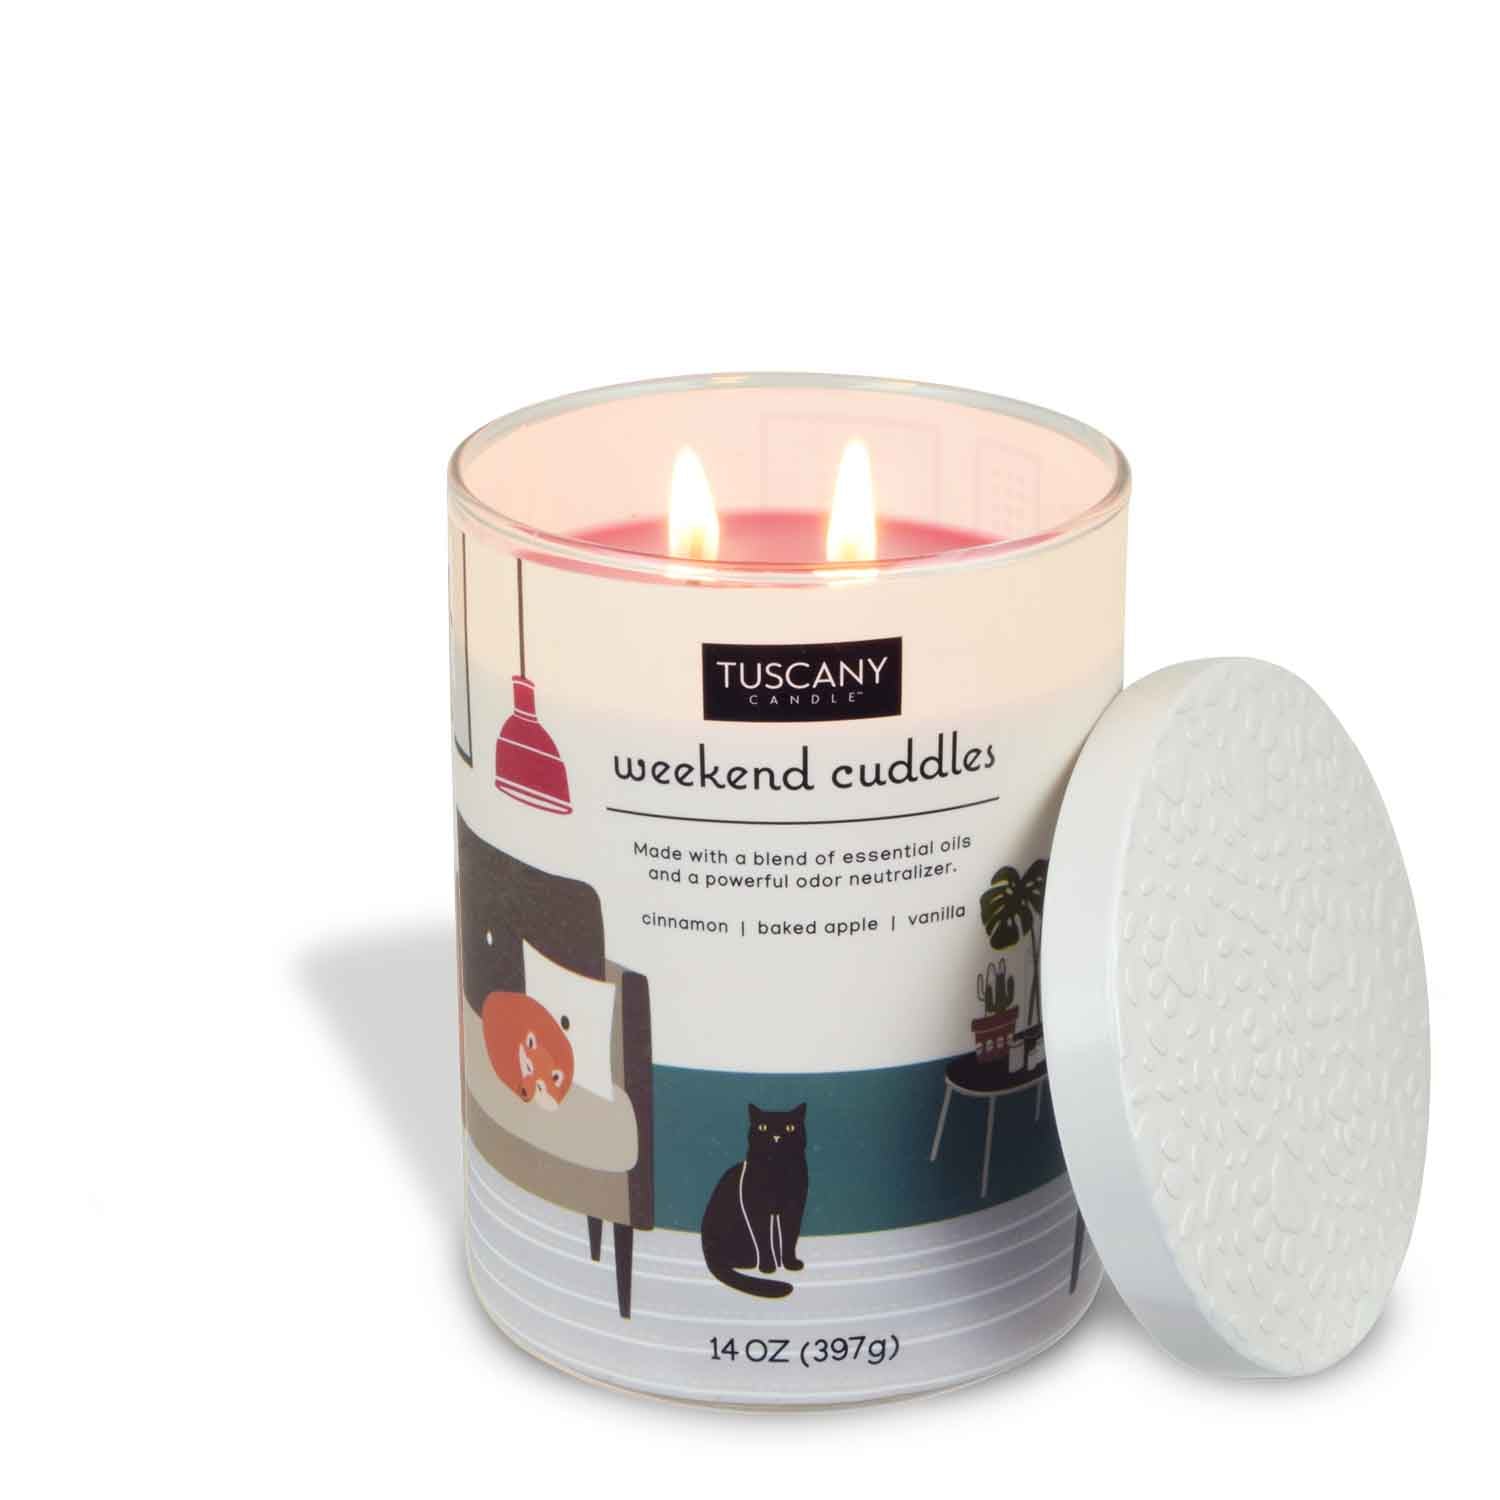 A Weekend Cuddles Scented Jar Candle (14 oz) – Pet Odor Control Collection with a Tuscany Candle sitting on top of it.